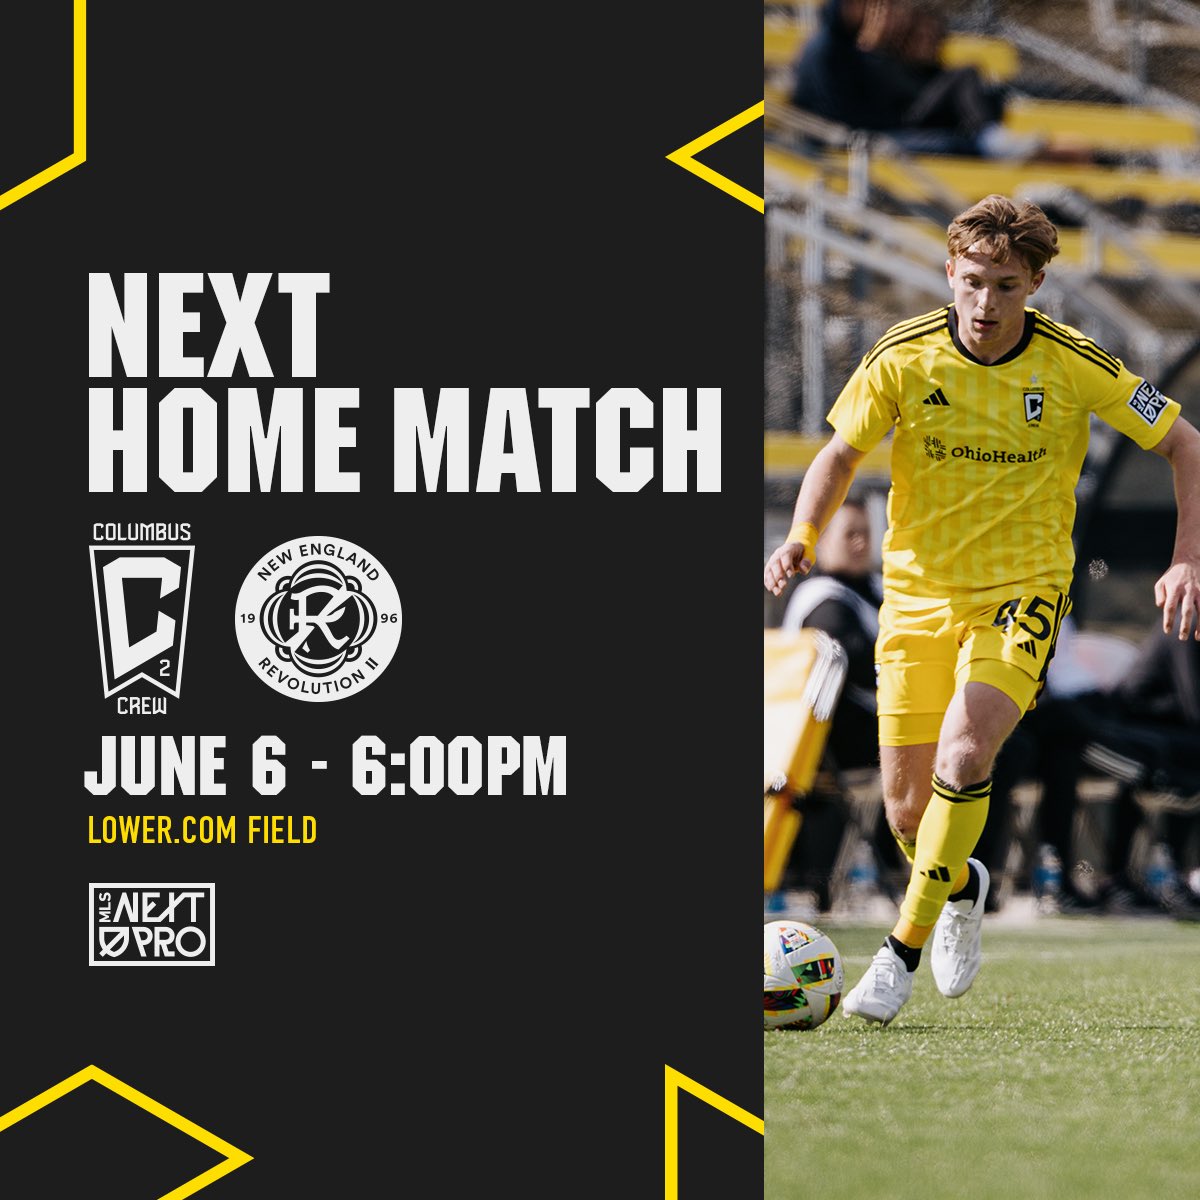 Catch us in Columbus 🔜

This weekend we will be taking on Philadelphia Union II on the road, but get ready for a quick turnaround because we are back in action at home midweek next week, taking on New England Revolution II at @LowerFieldCbus 🙌

🎟️: cbuscrew.com/4bZBYgO